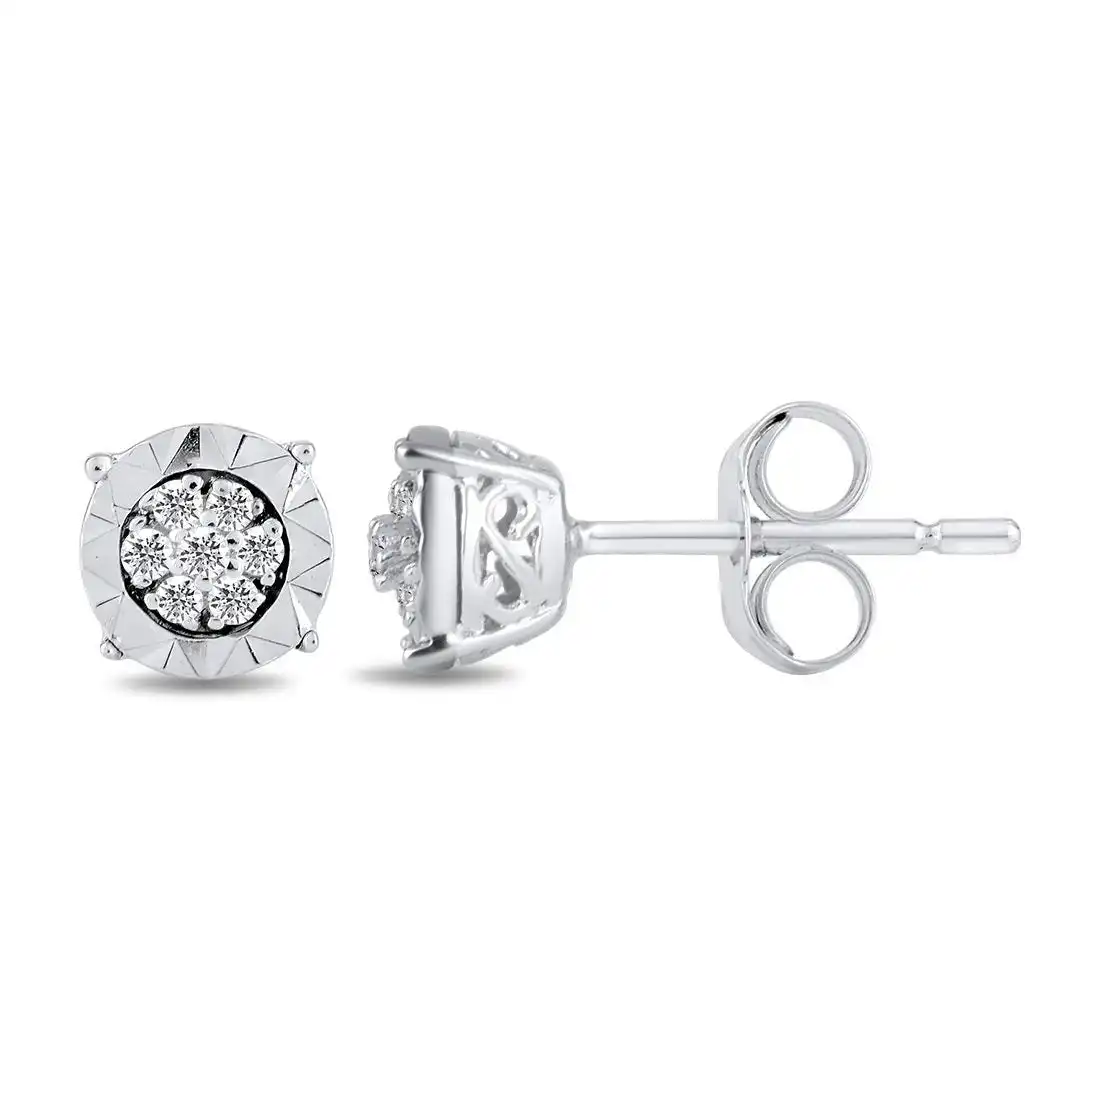 Tia Miracle Composite Diamond Earrings in 9ct White Gold